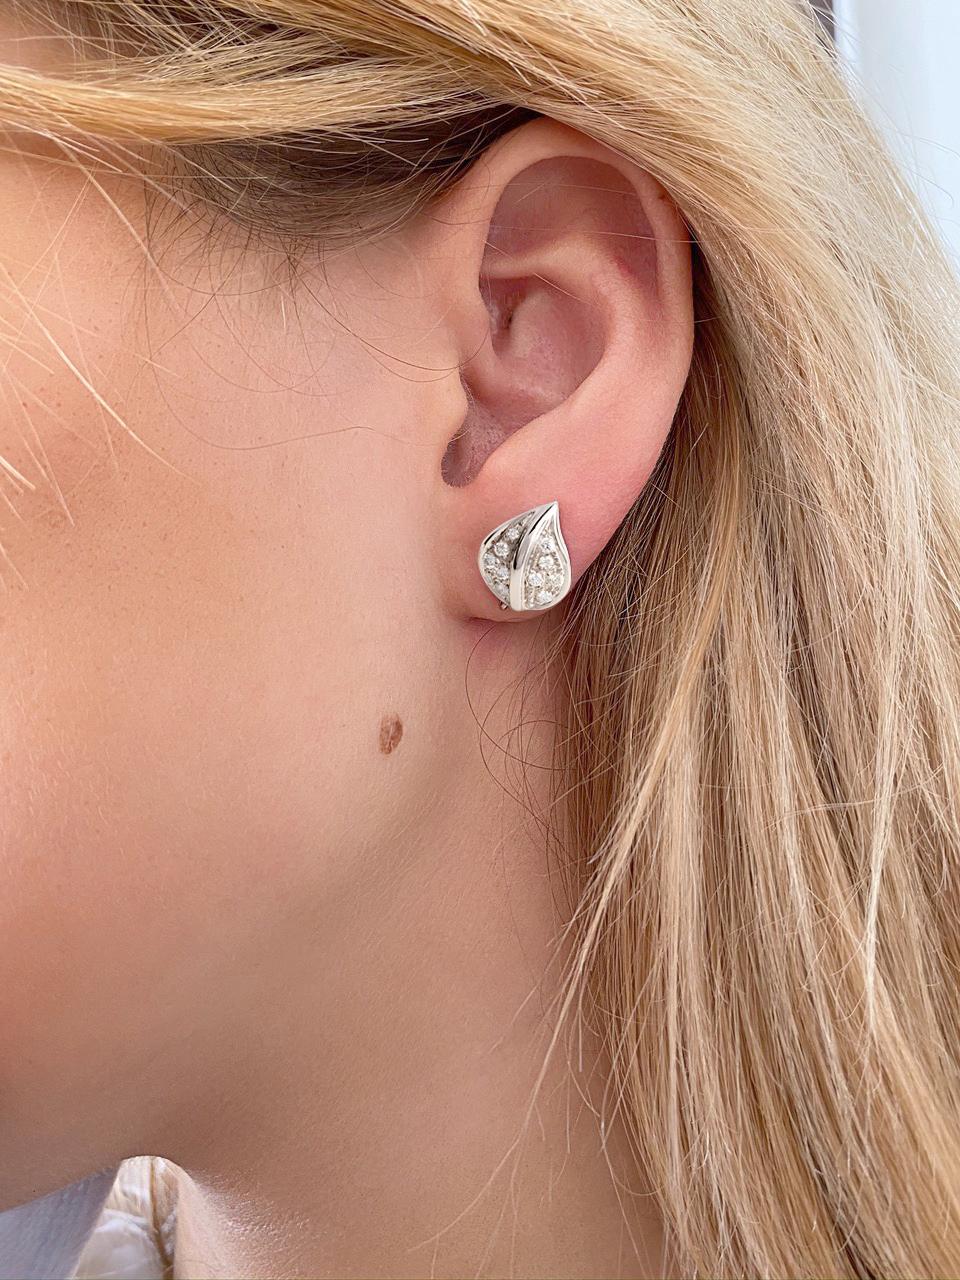 Rossella Ugolini Silhouette Collection, elegant leaves shape stud earrings are perfect for everyday time due to their leaves shape.  Handcrafted in 18 karats White Gold and adorned with White Diamonds are available clip on on request.
18 Karat White